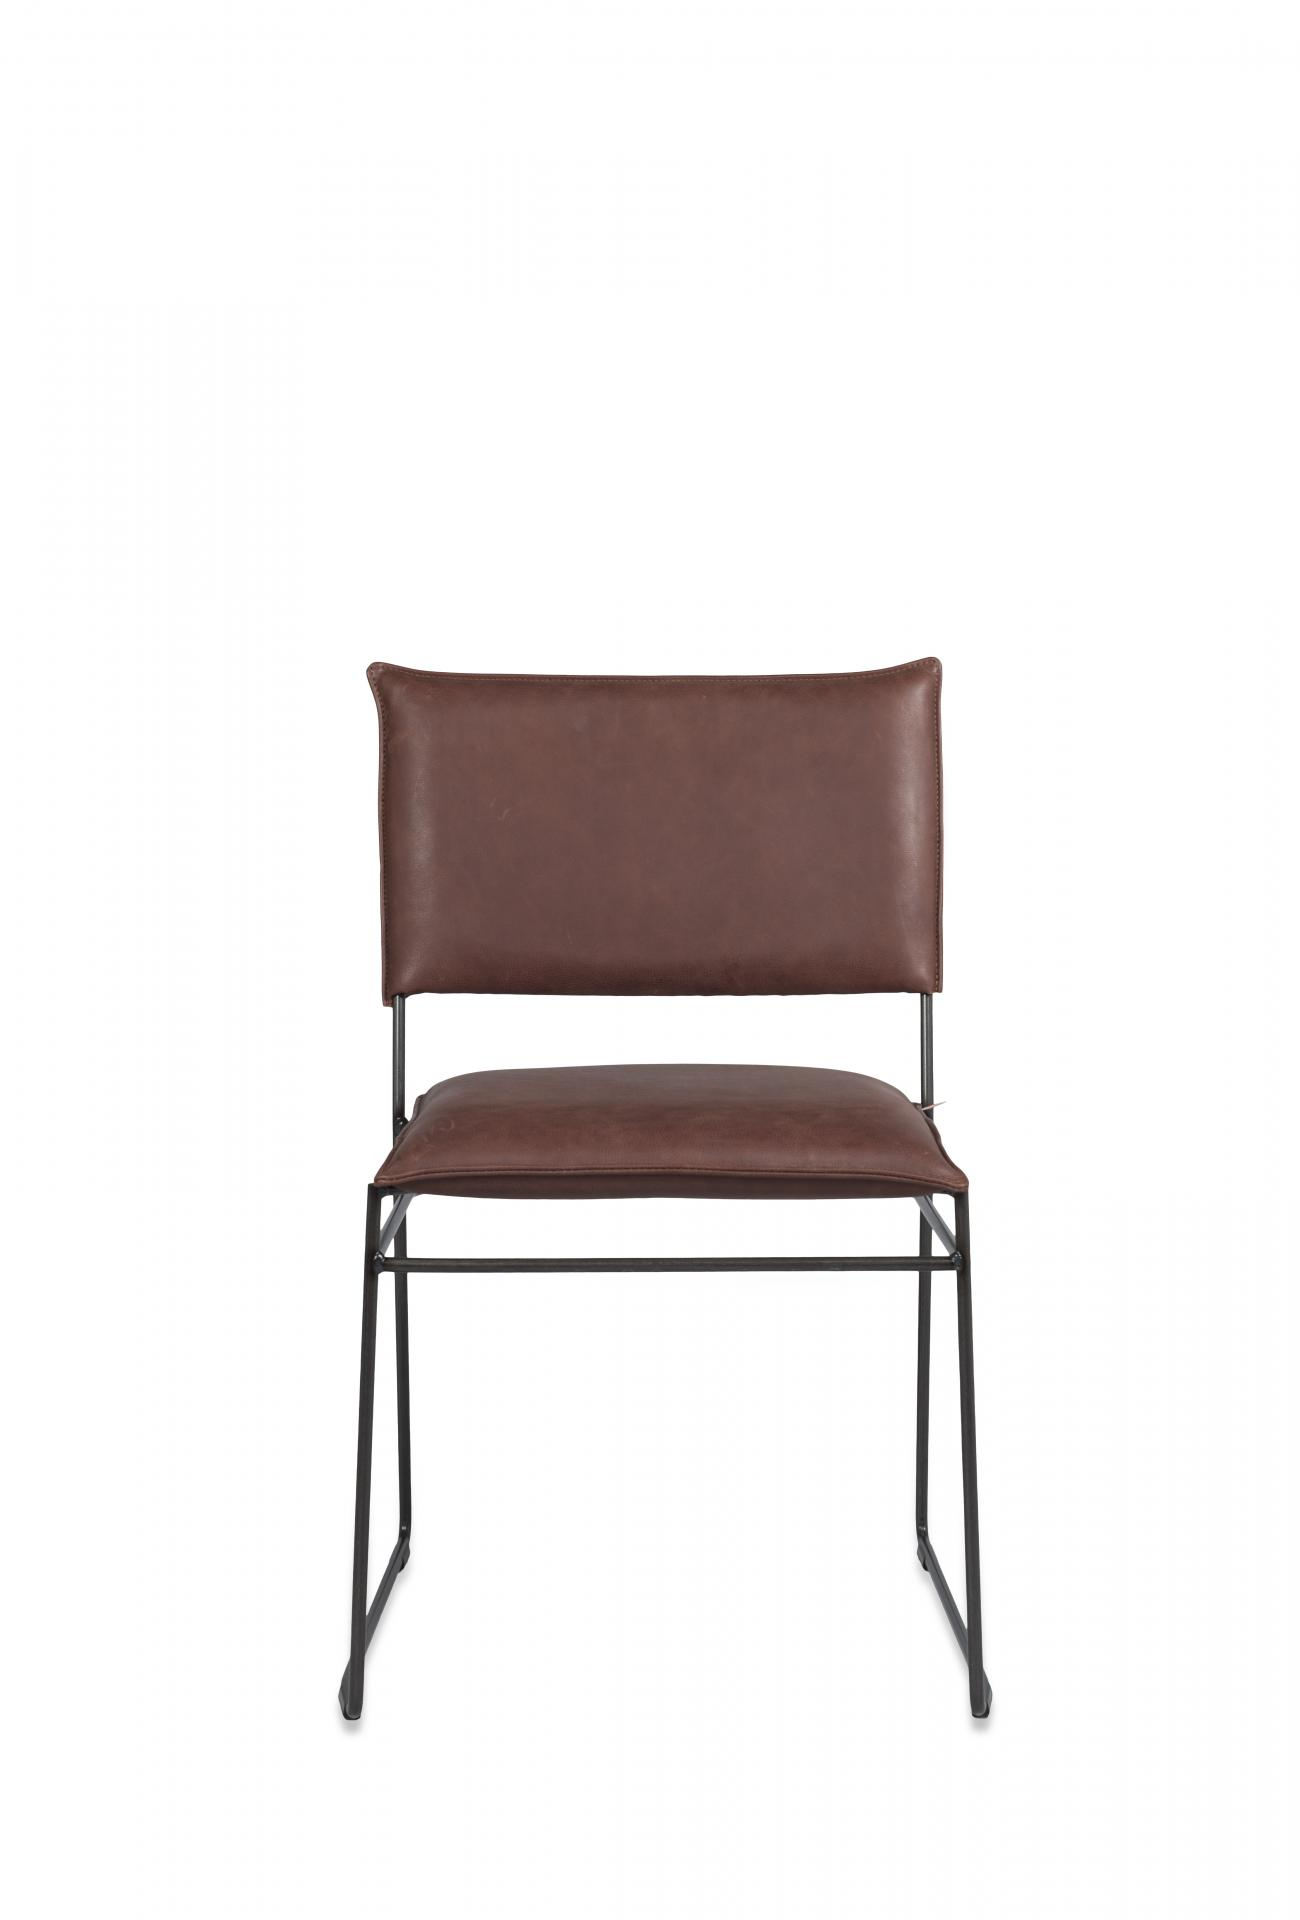 https://www.fundesign.nl/media/catalog/product/n/o/norman_diningchair_stackable_frame_old_glory_bonanza_british_tan_front.jpg